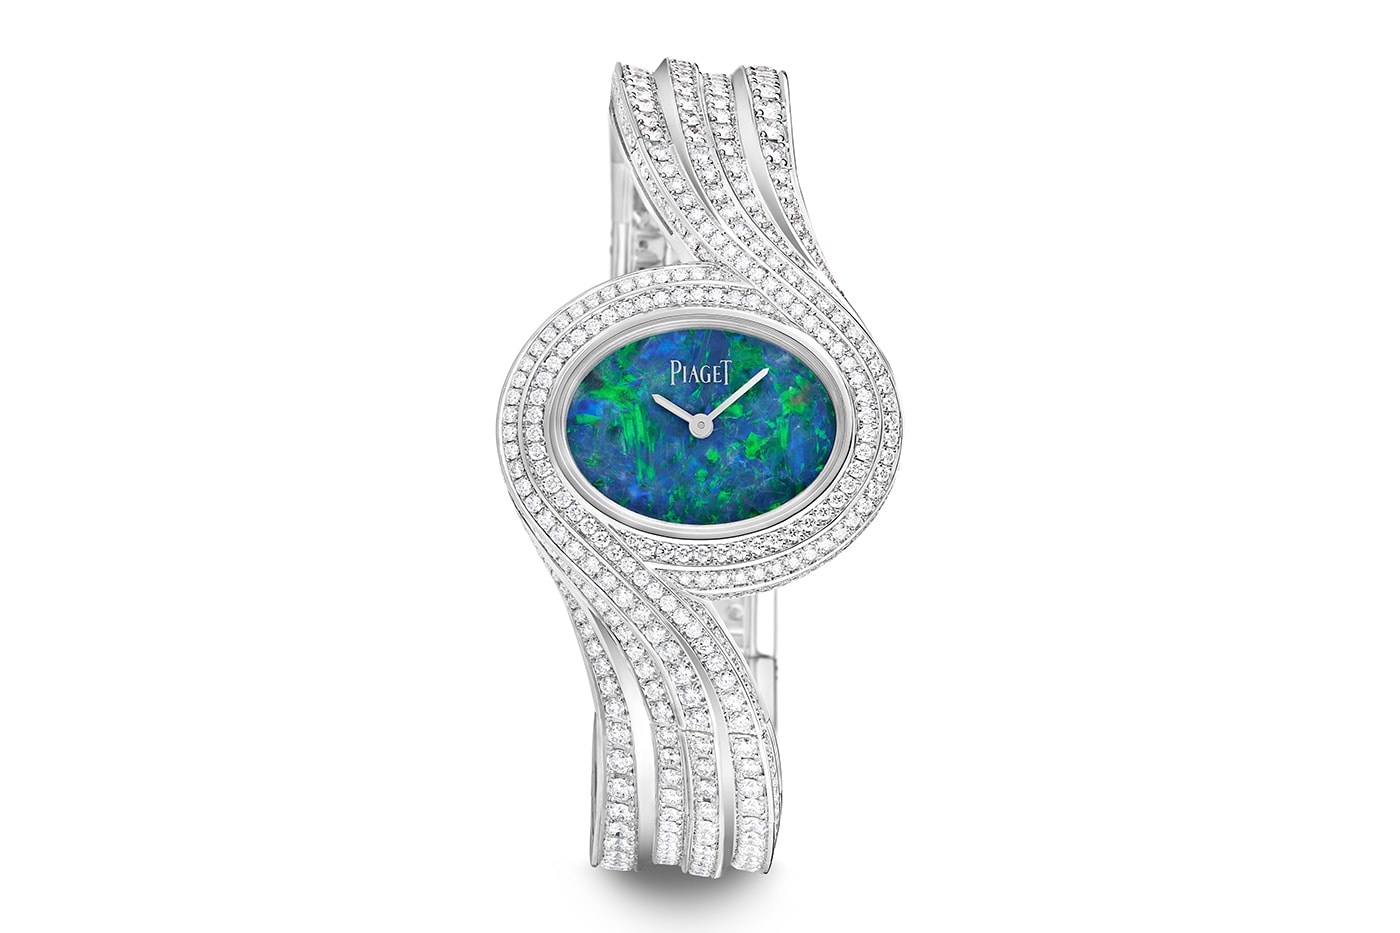 Piaget Metaphoria Collection High Jewelry Release Info